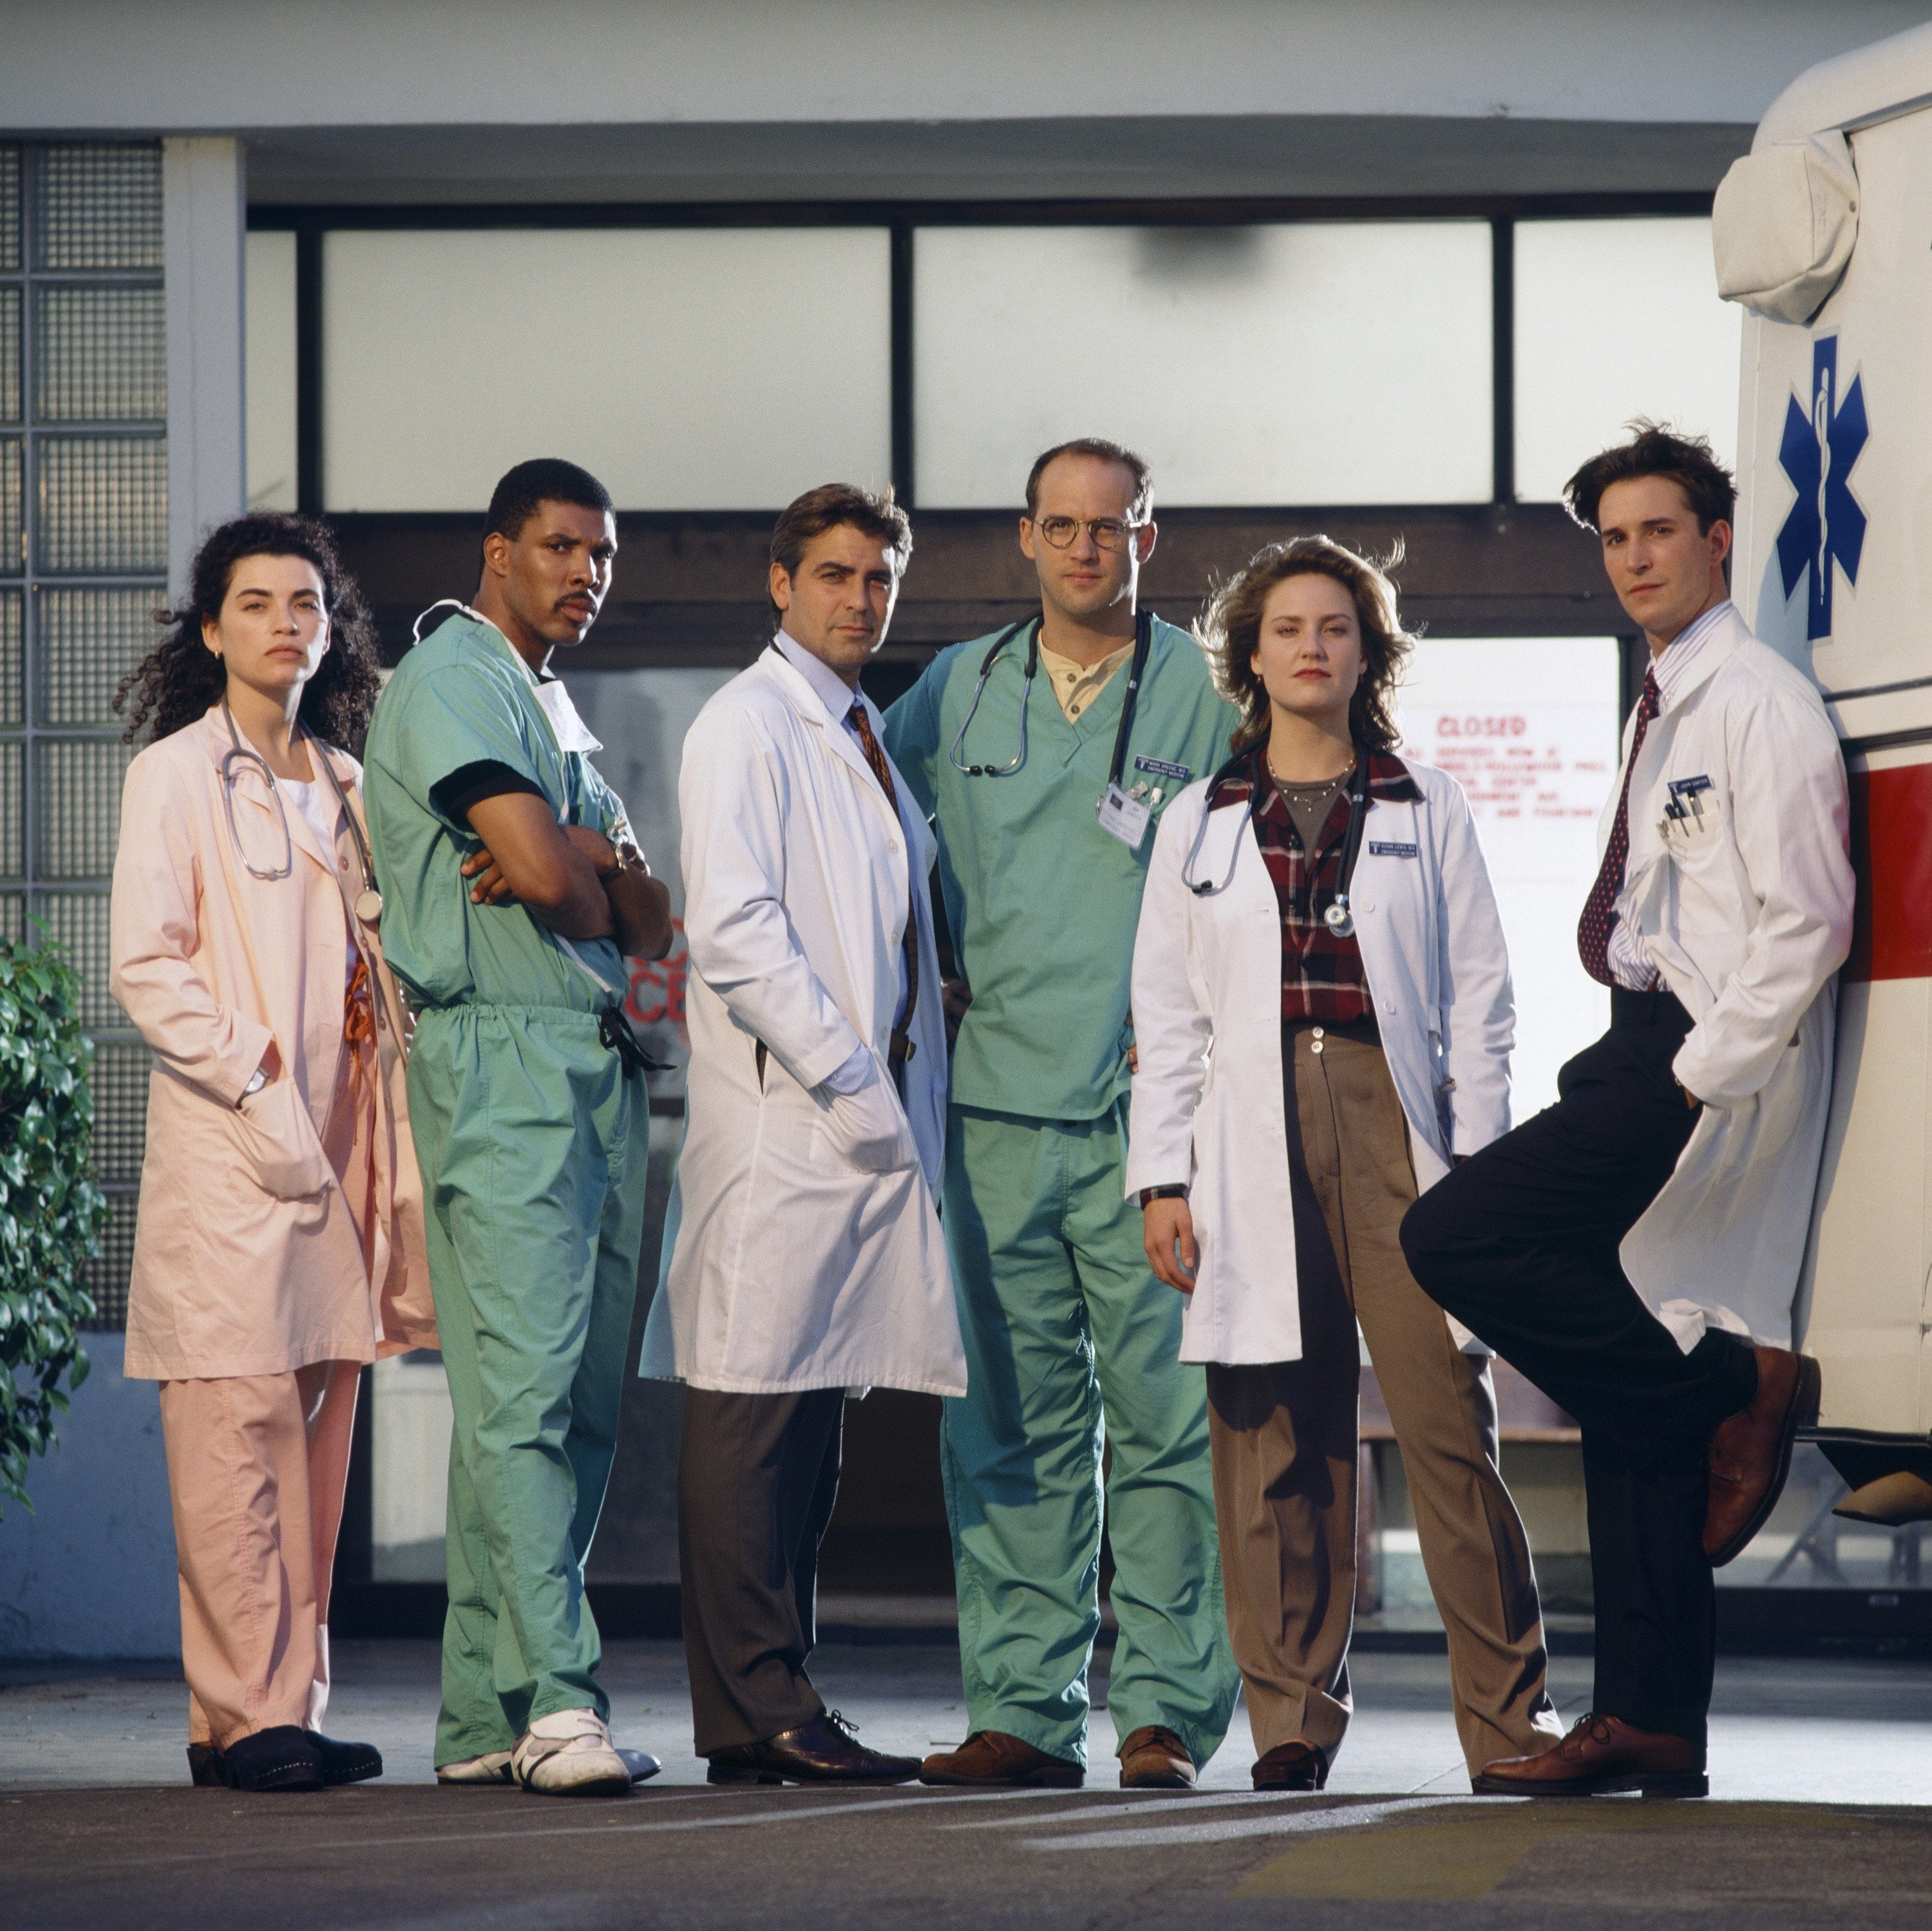 A promotional photo for ER